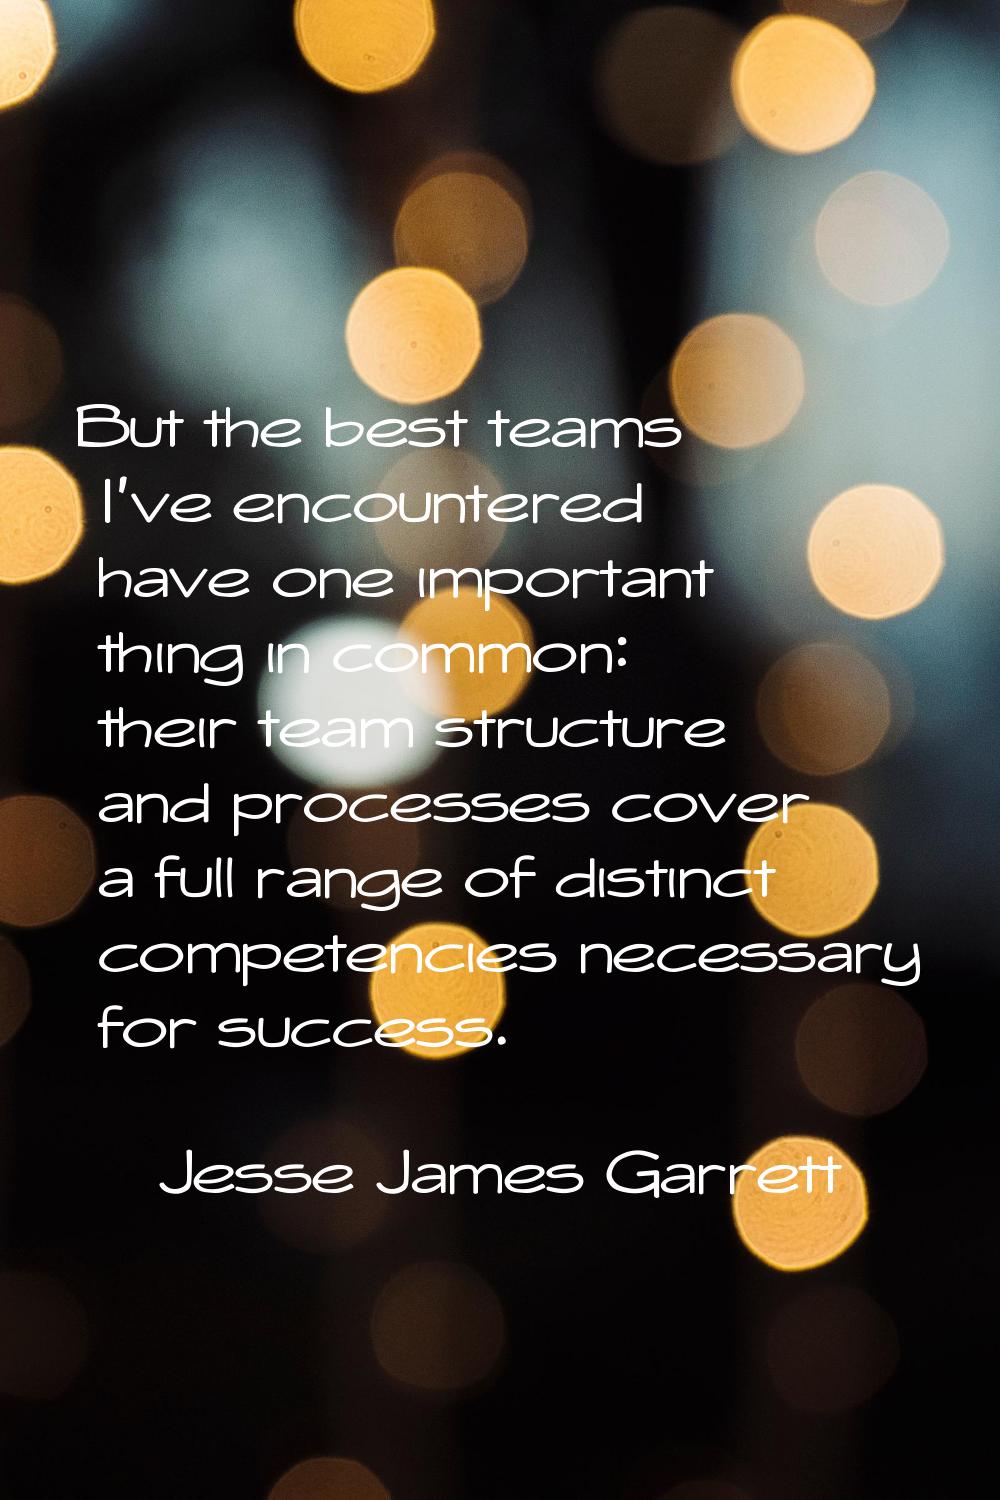 But the best teams I've encountered have one important thing in common: their team structure and pr